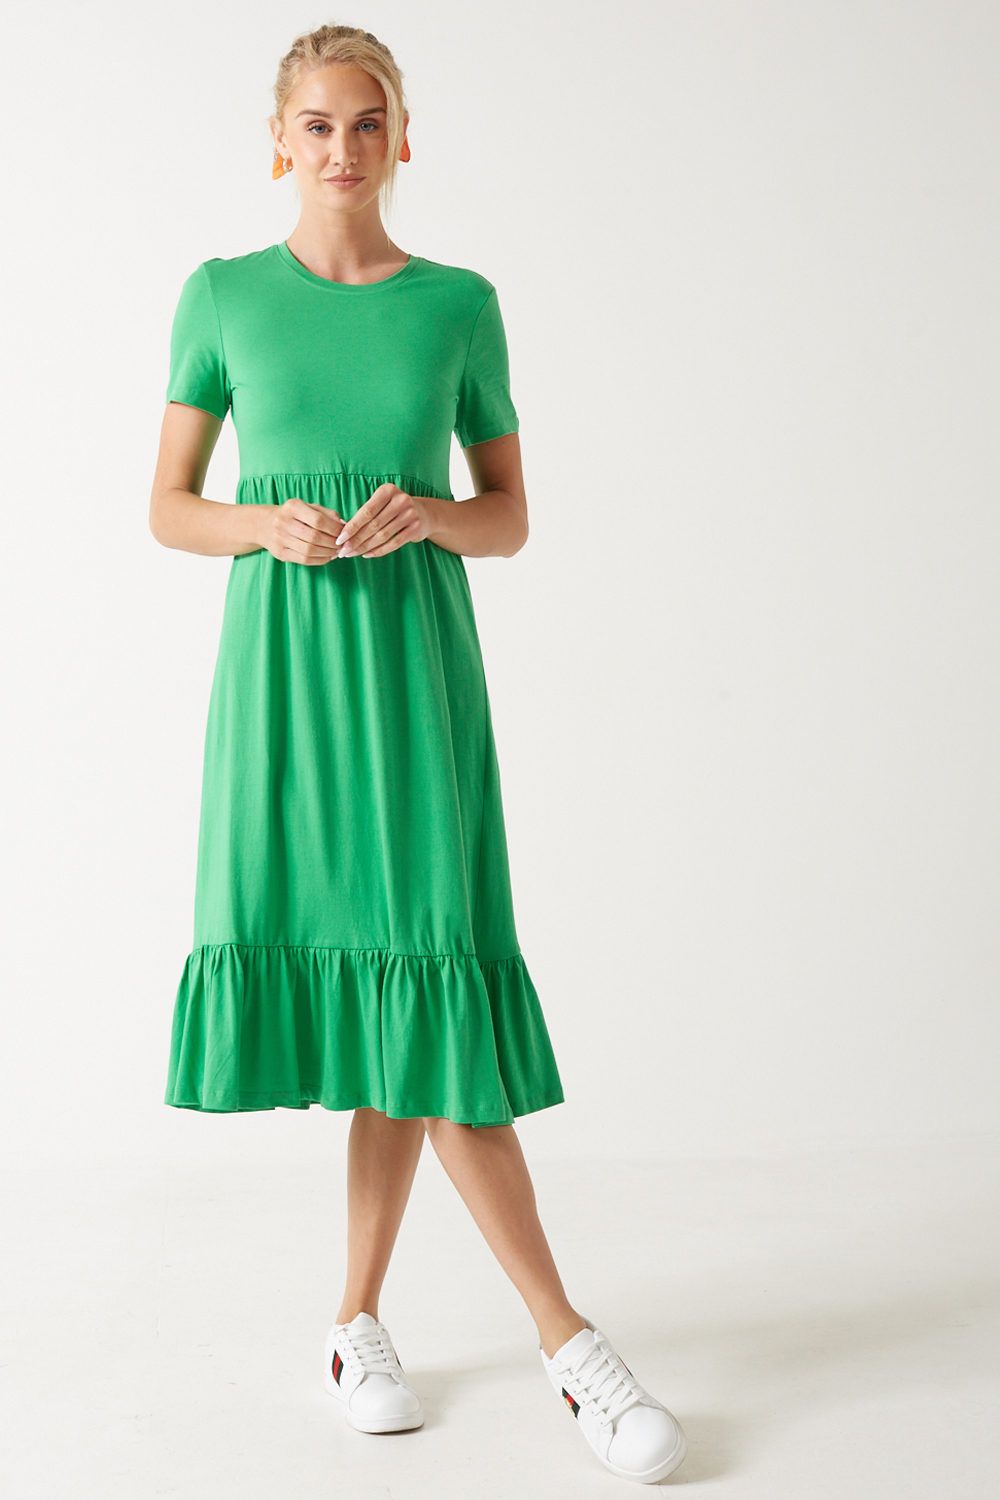 Calf - | Dress Only S/S iCLOTHING in May iCLOTHING Green Peplum